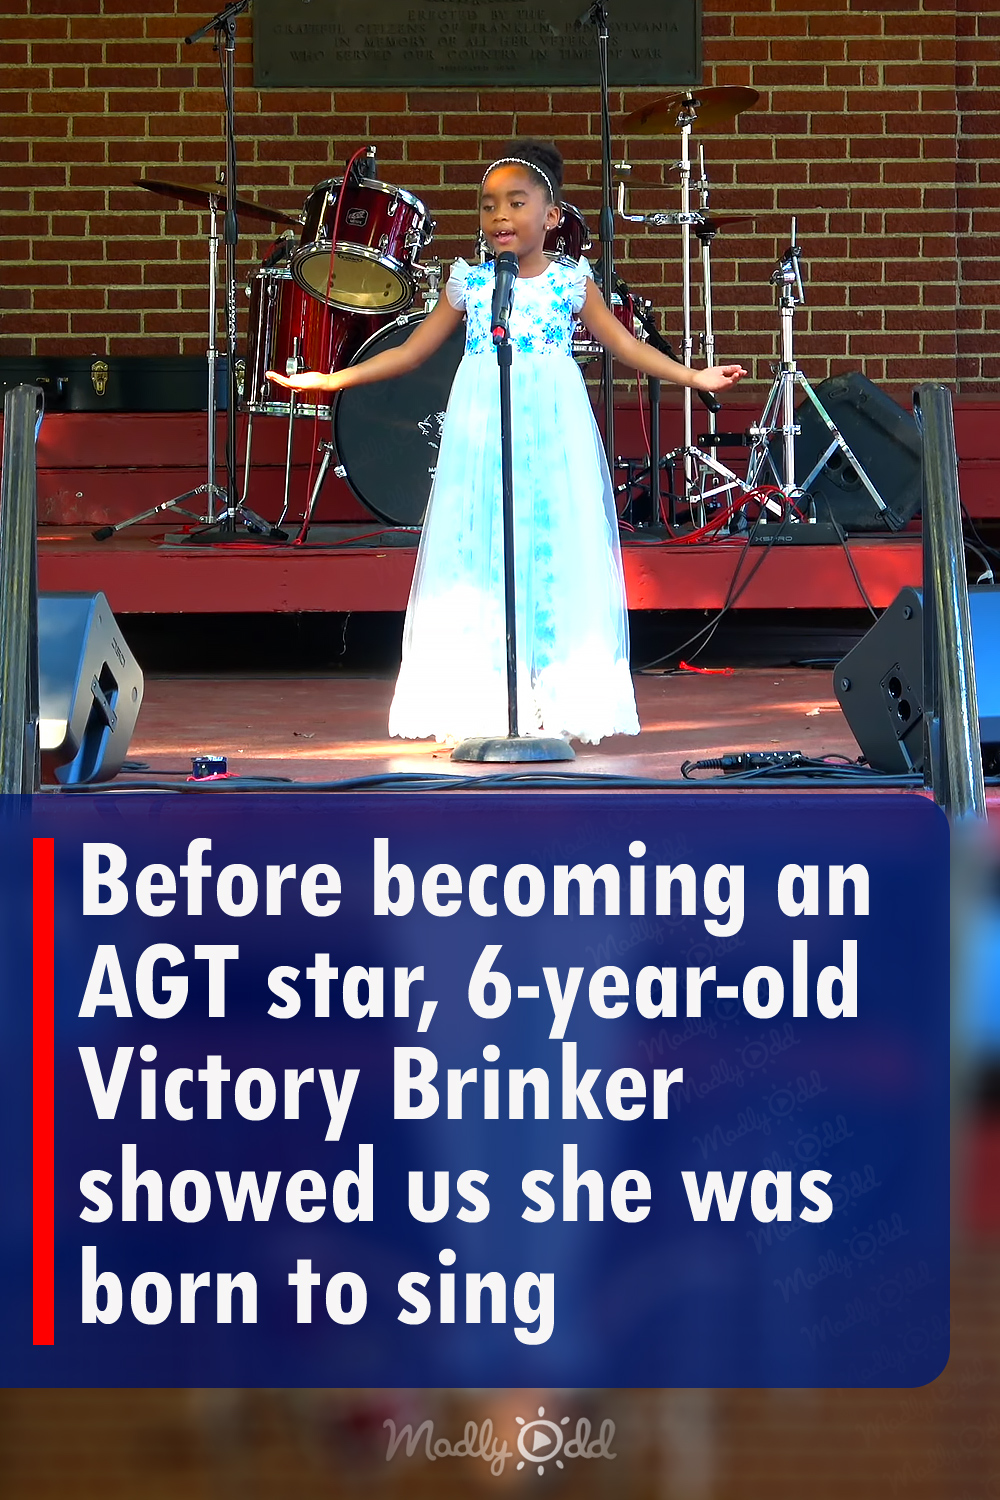 Before becoming an AGT star, 6-year-old Victory Brinker showed us she was born to sing